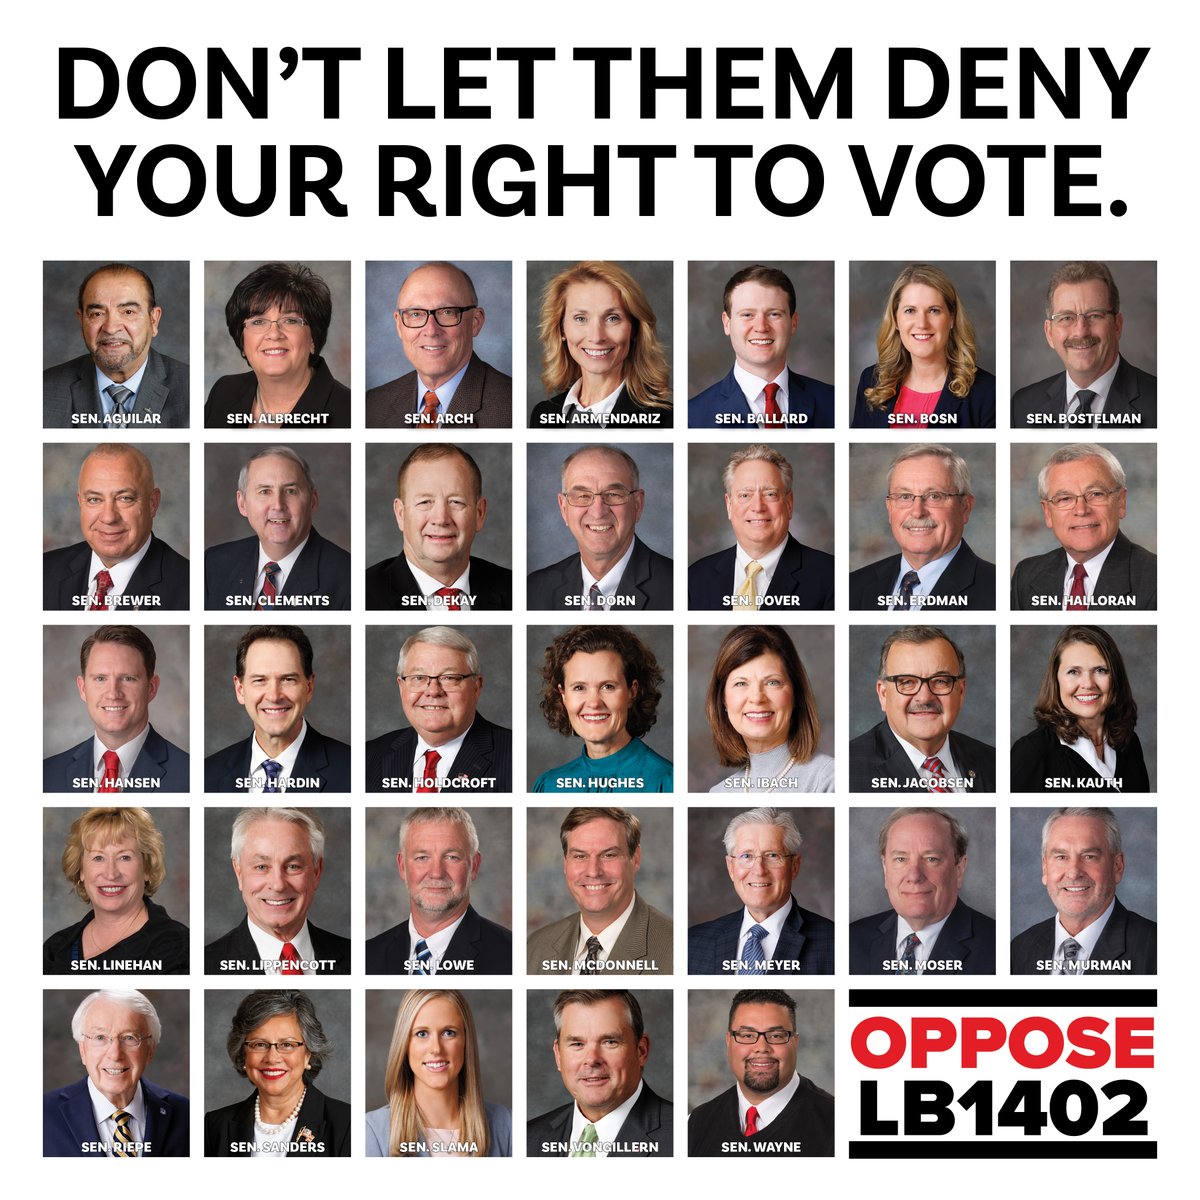 117,415 Nebraskans signed the successful referendum petition to let voters decide the issue of diverting public funds to private schools. These senators are trying to take away your right to vote on this issue. Tell them to VOTE NO on cloture on LB1402! nsea.org/LetMeVote.